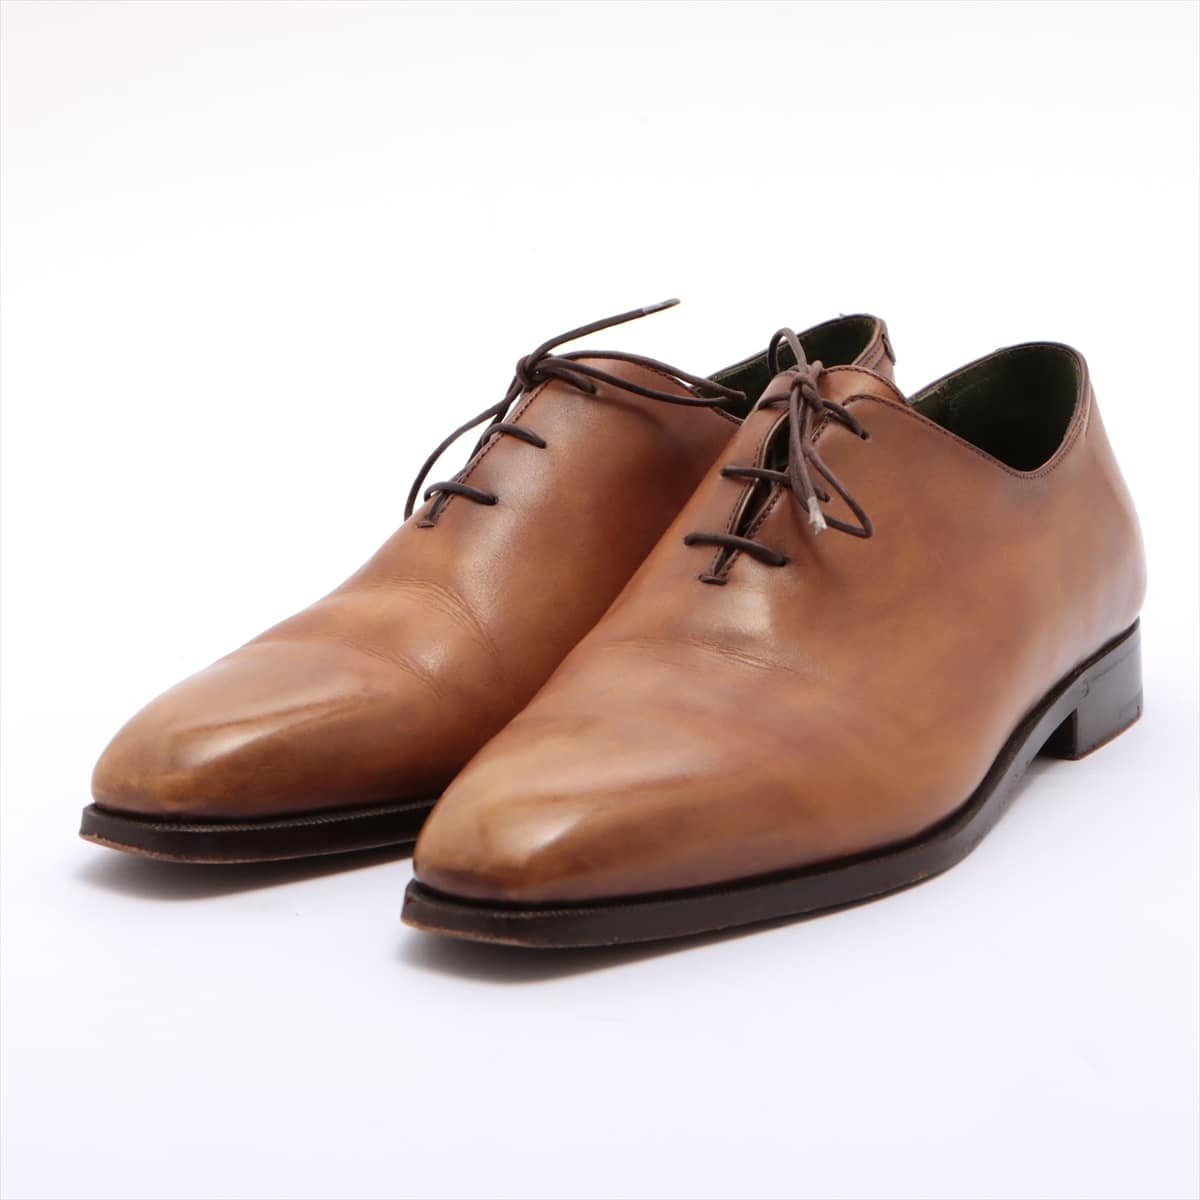 Berluti Alessandro Leather Leather shoes 8 Men's Brown With genuine shoe tree